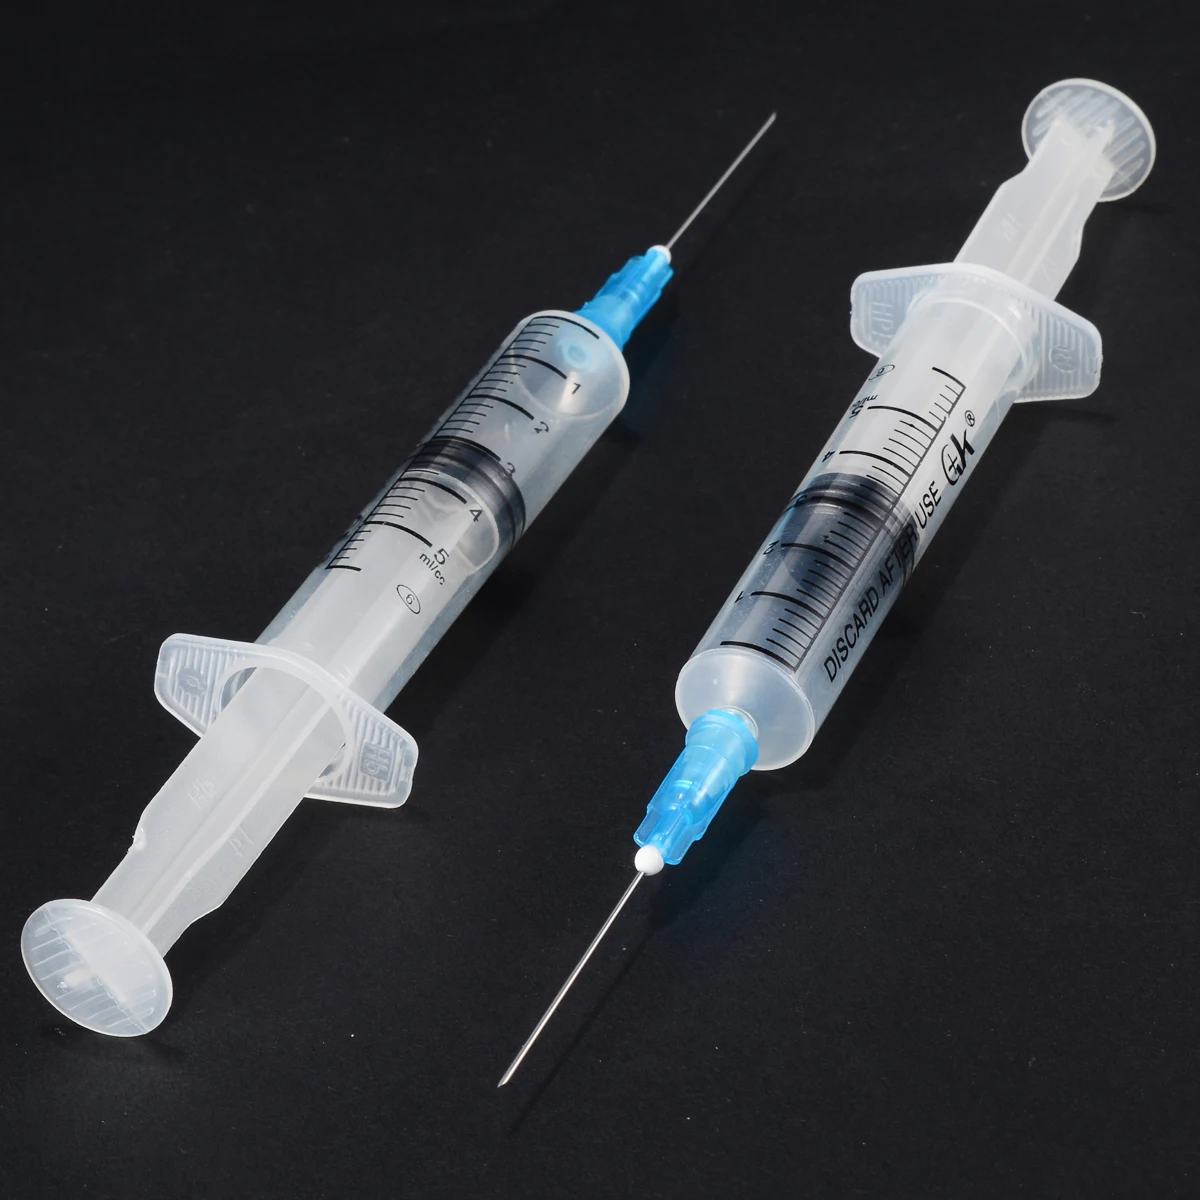 5 Set 5ml Plastic Syringe With Sharp End Tip Needle And Storage Cap For Dispensing Adhesives Glue Soldering Paste